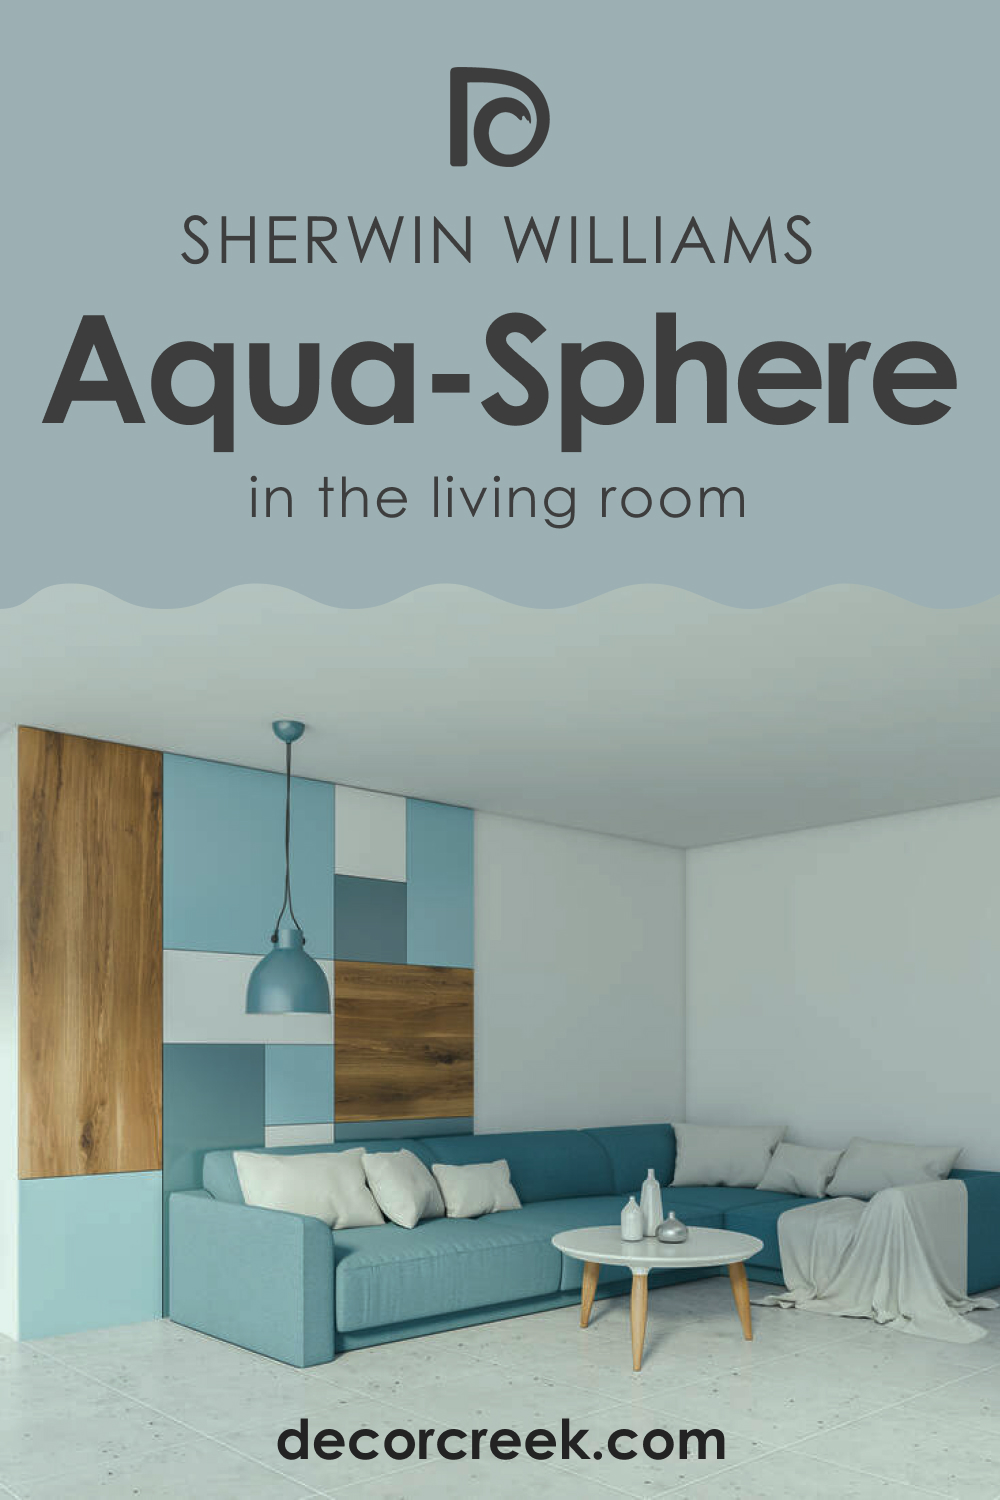 How to Use SW 7613 Aqua-Sphere in the Living Room?